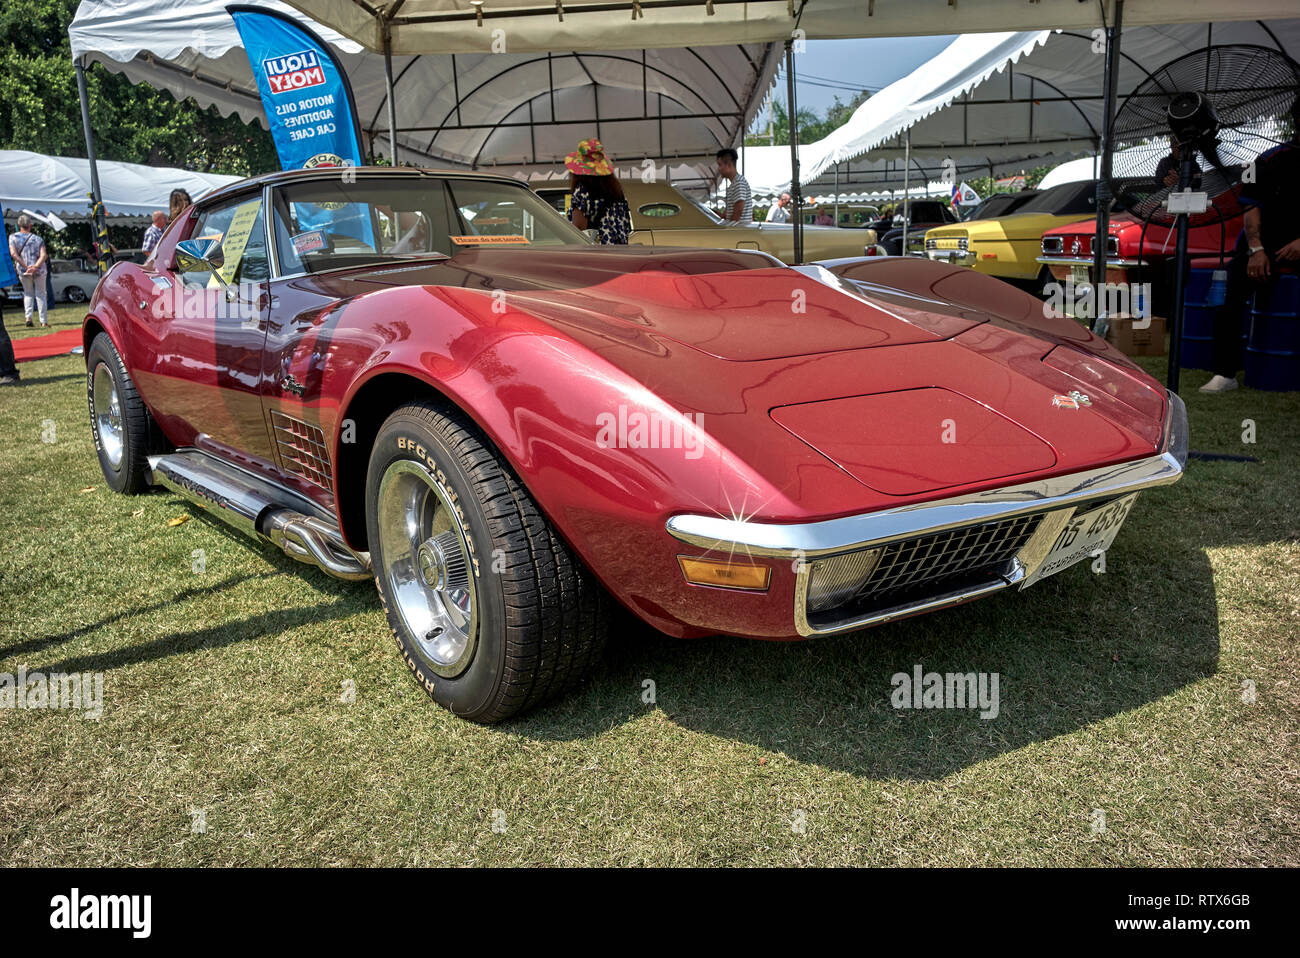 Chevrolet Corvette C3 sports car red 1971 vintage American muscle car Stock Photo